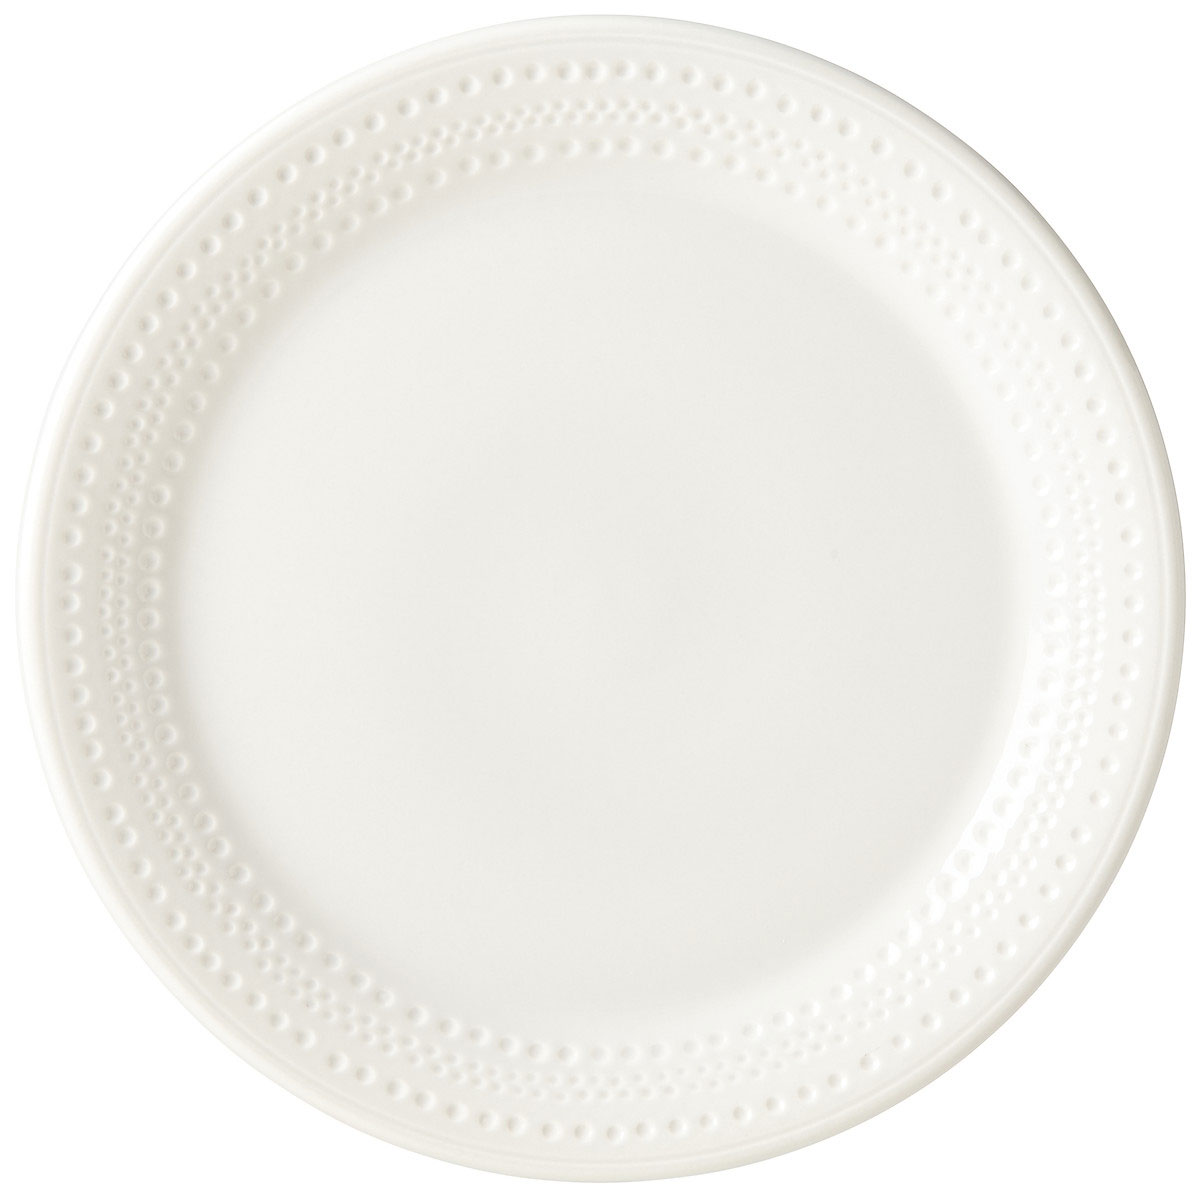 Kate Spade China by Lenox, Willow Drive Cream Dinner Plate, Single